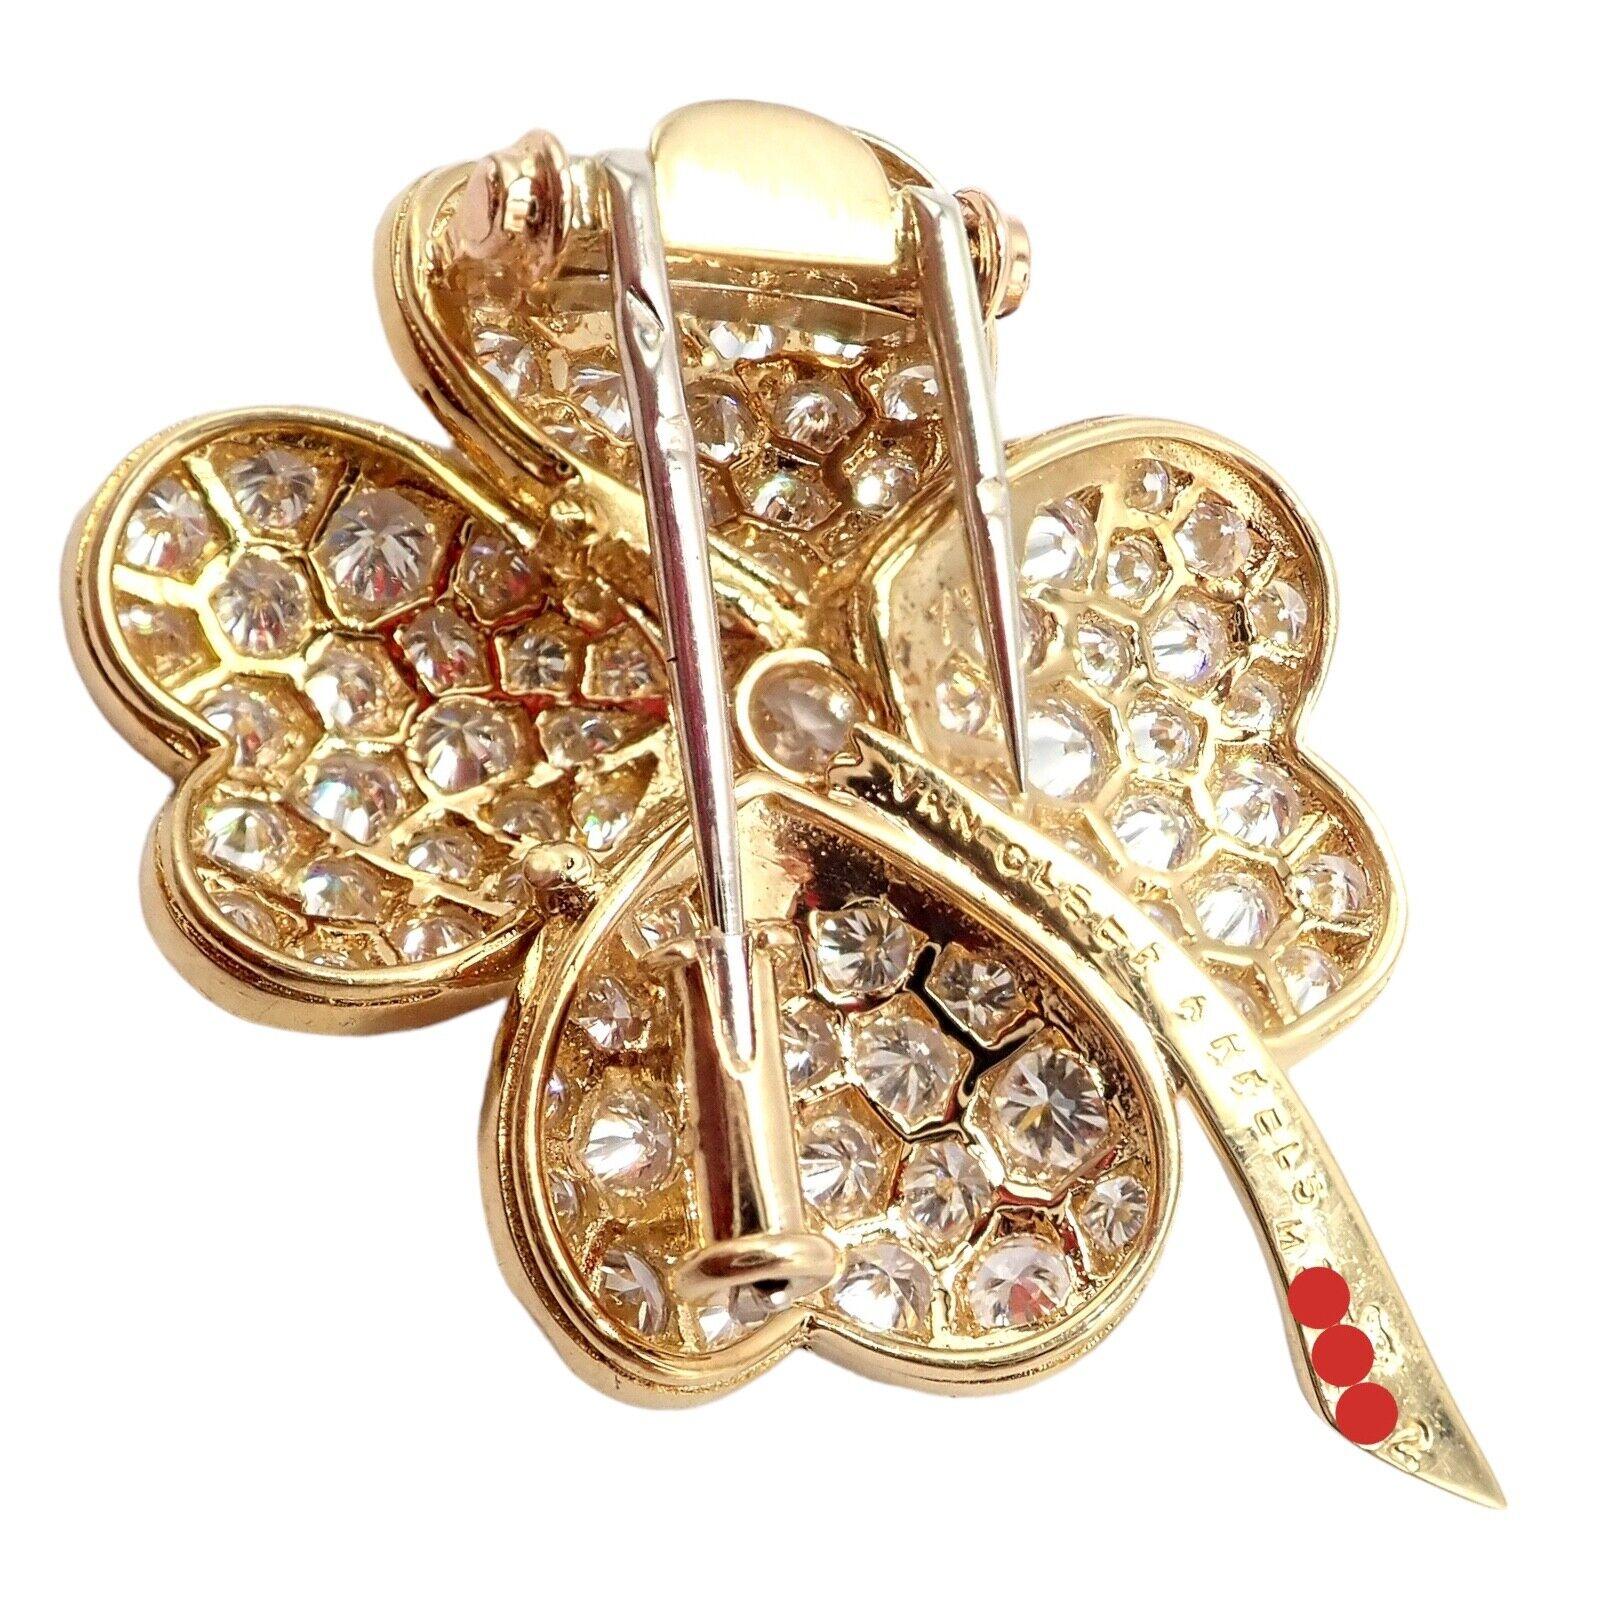 Van Cleef & Arpels Cosmos Diamond Yellow Gold Pendant Brooch In Excellent Condition For Sale In Holland, PA